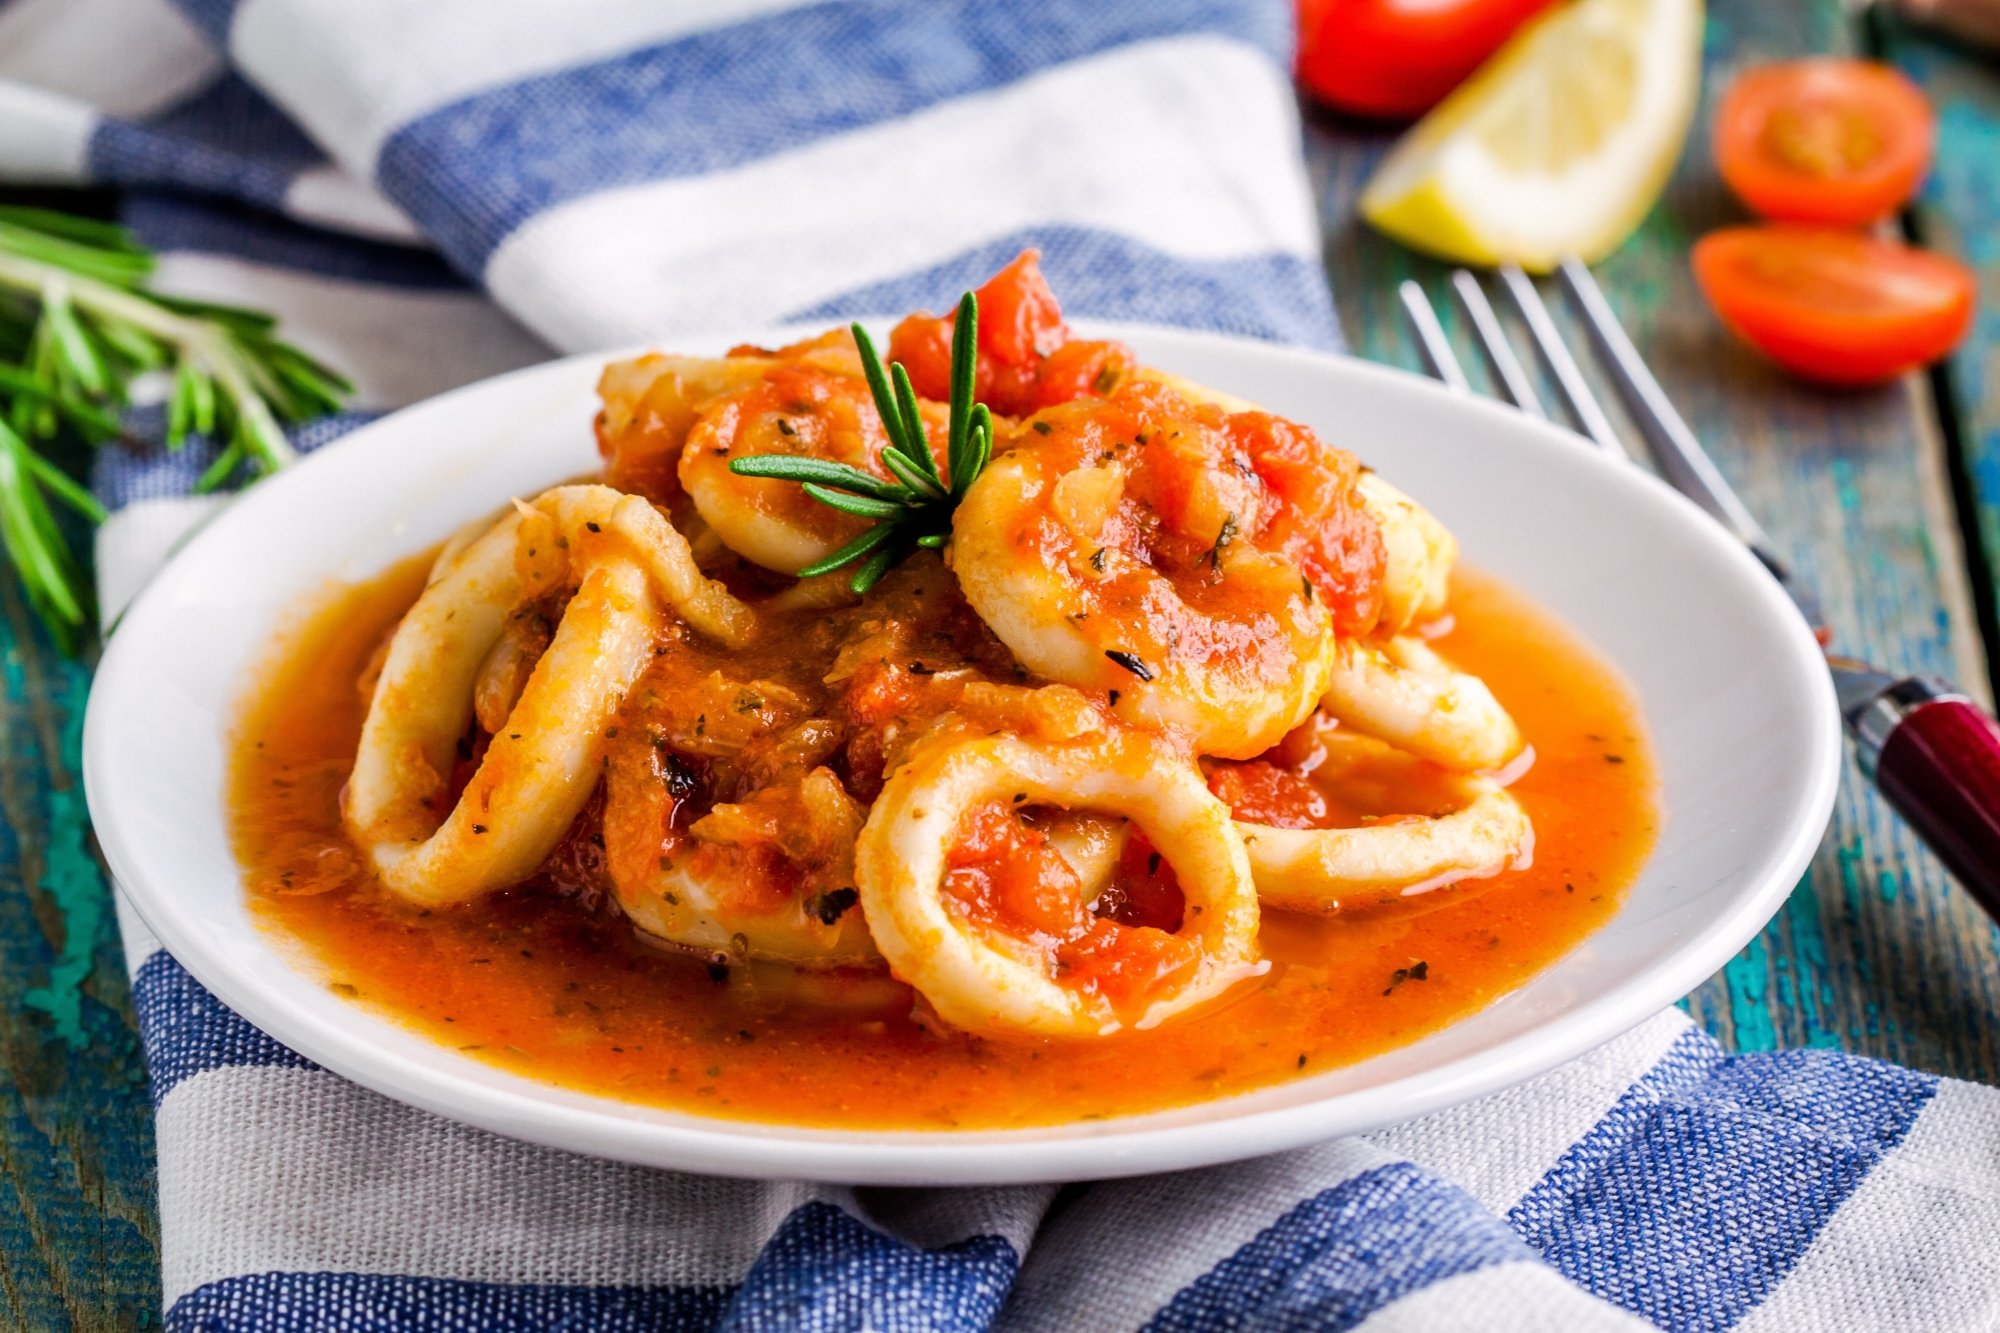 https://media3.woopic.com/api/v1/images/2115%2Fwebedia-recettes%2Fb38%2Fed6%2Fccd6964c7b5ded04a4bf173fcd%2F1350004-calamars-sauce-armoricaine-orig-1.jpg?facedetect=1&quality=85